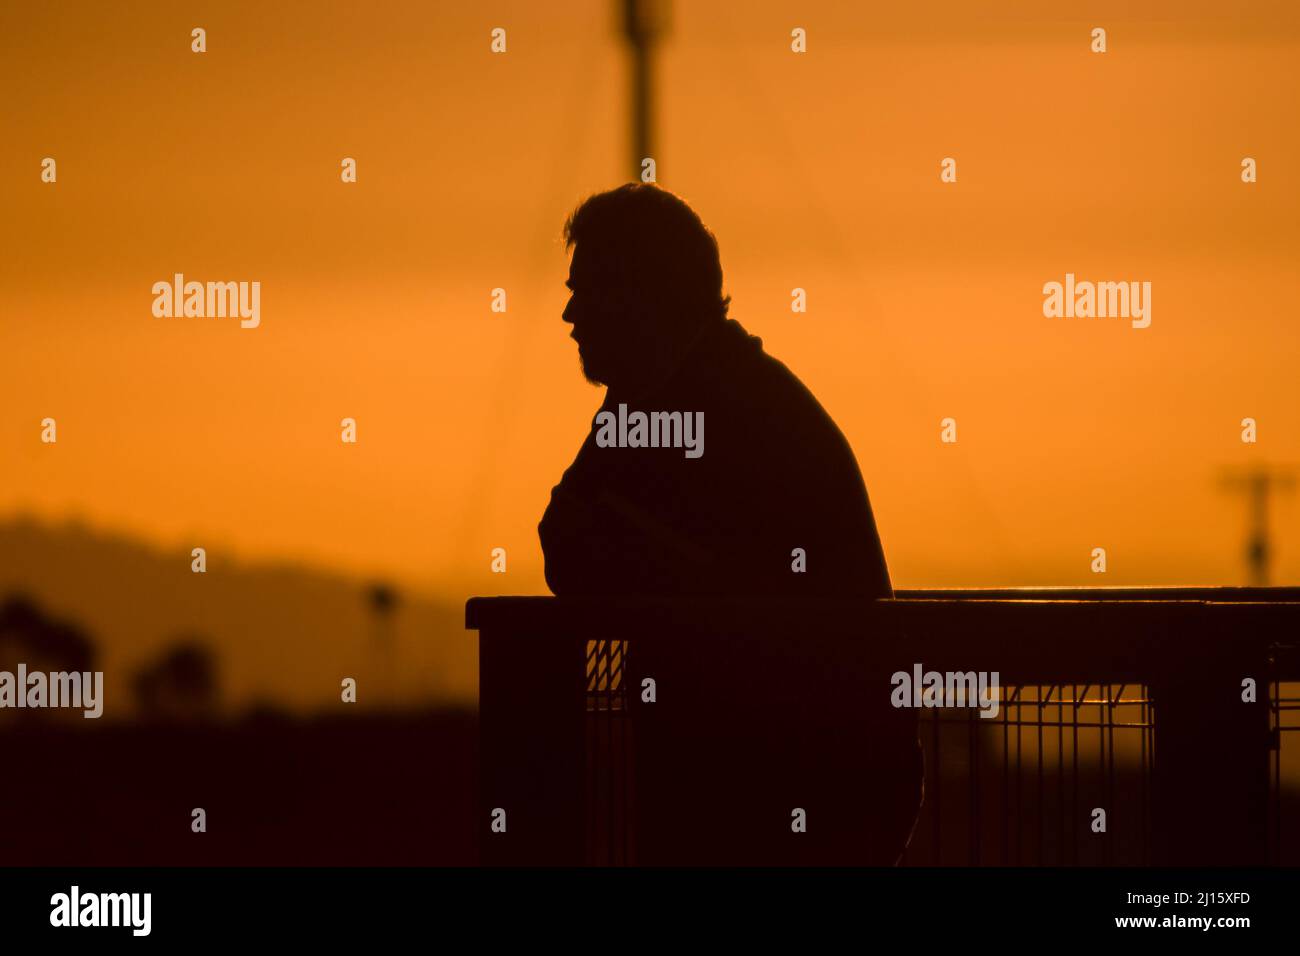 Silhouette of man with beard at sunset leaning on fence looking out at view Stock Photo